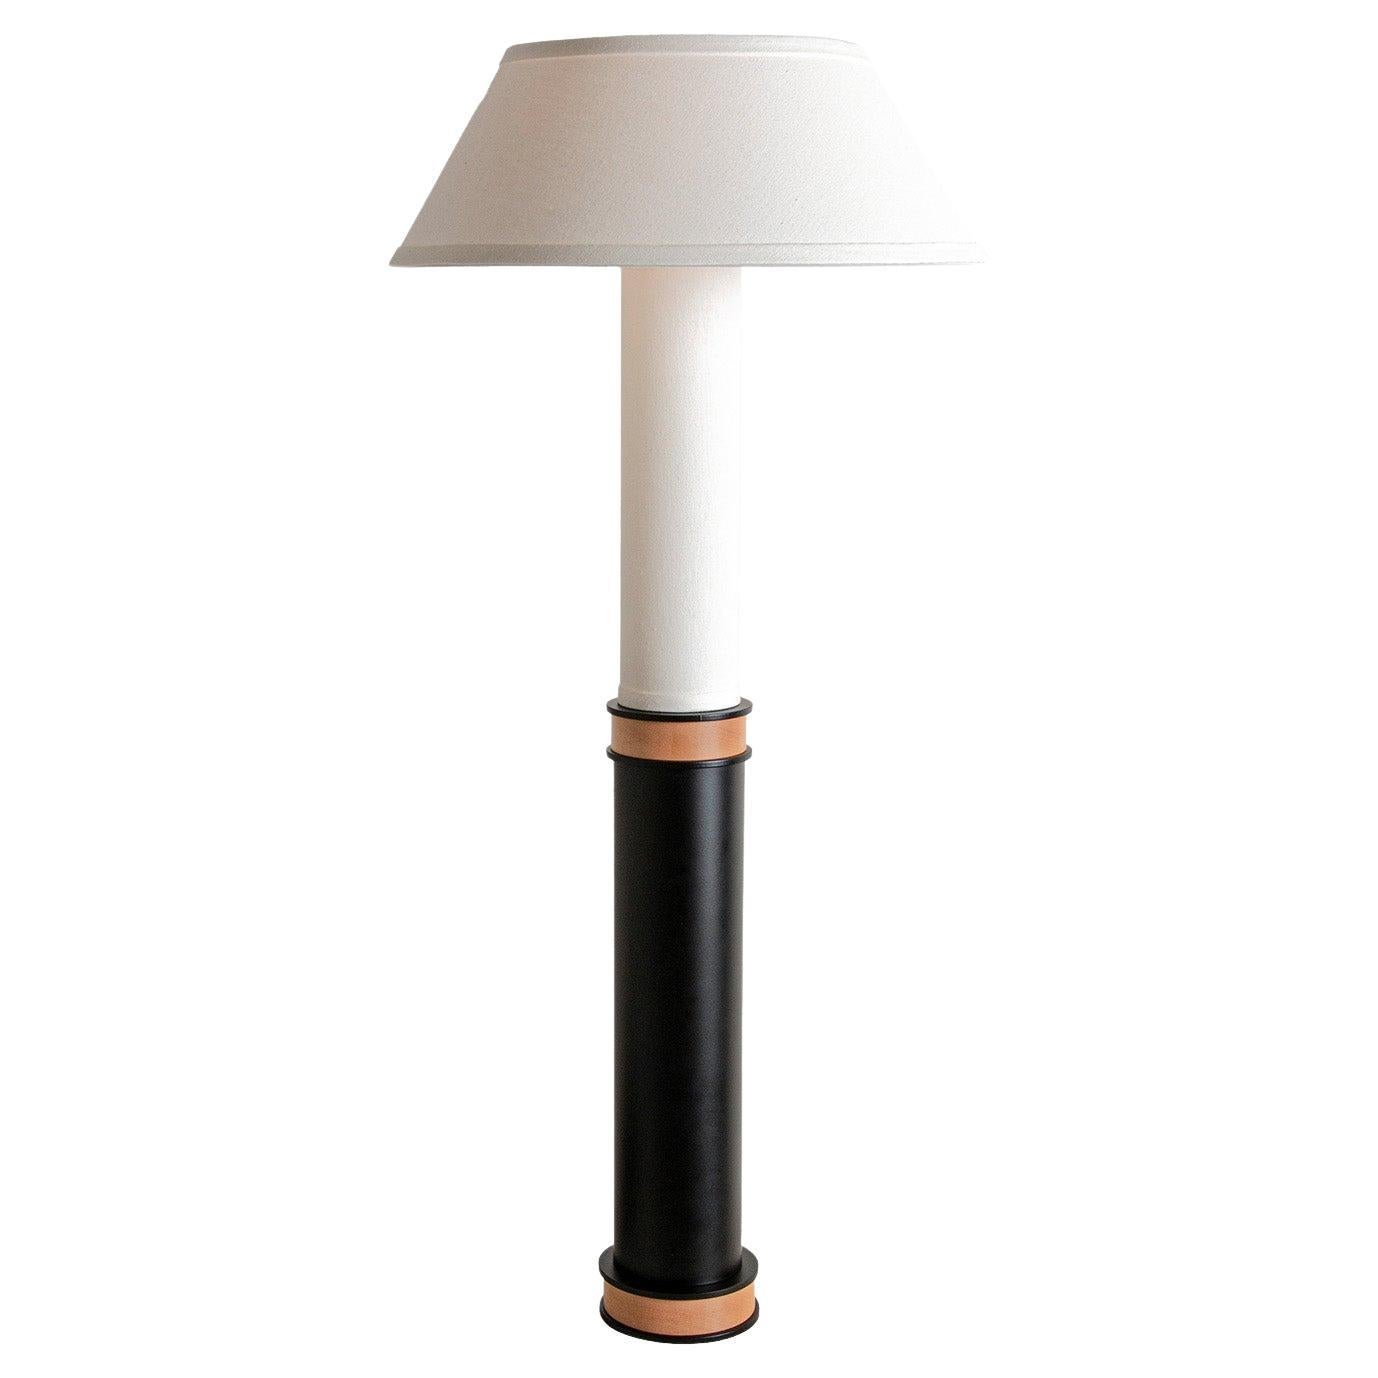 Pillaret 34in Table Lamp by Studio DUNN For Sale